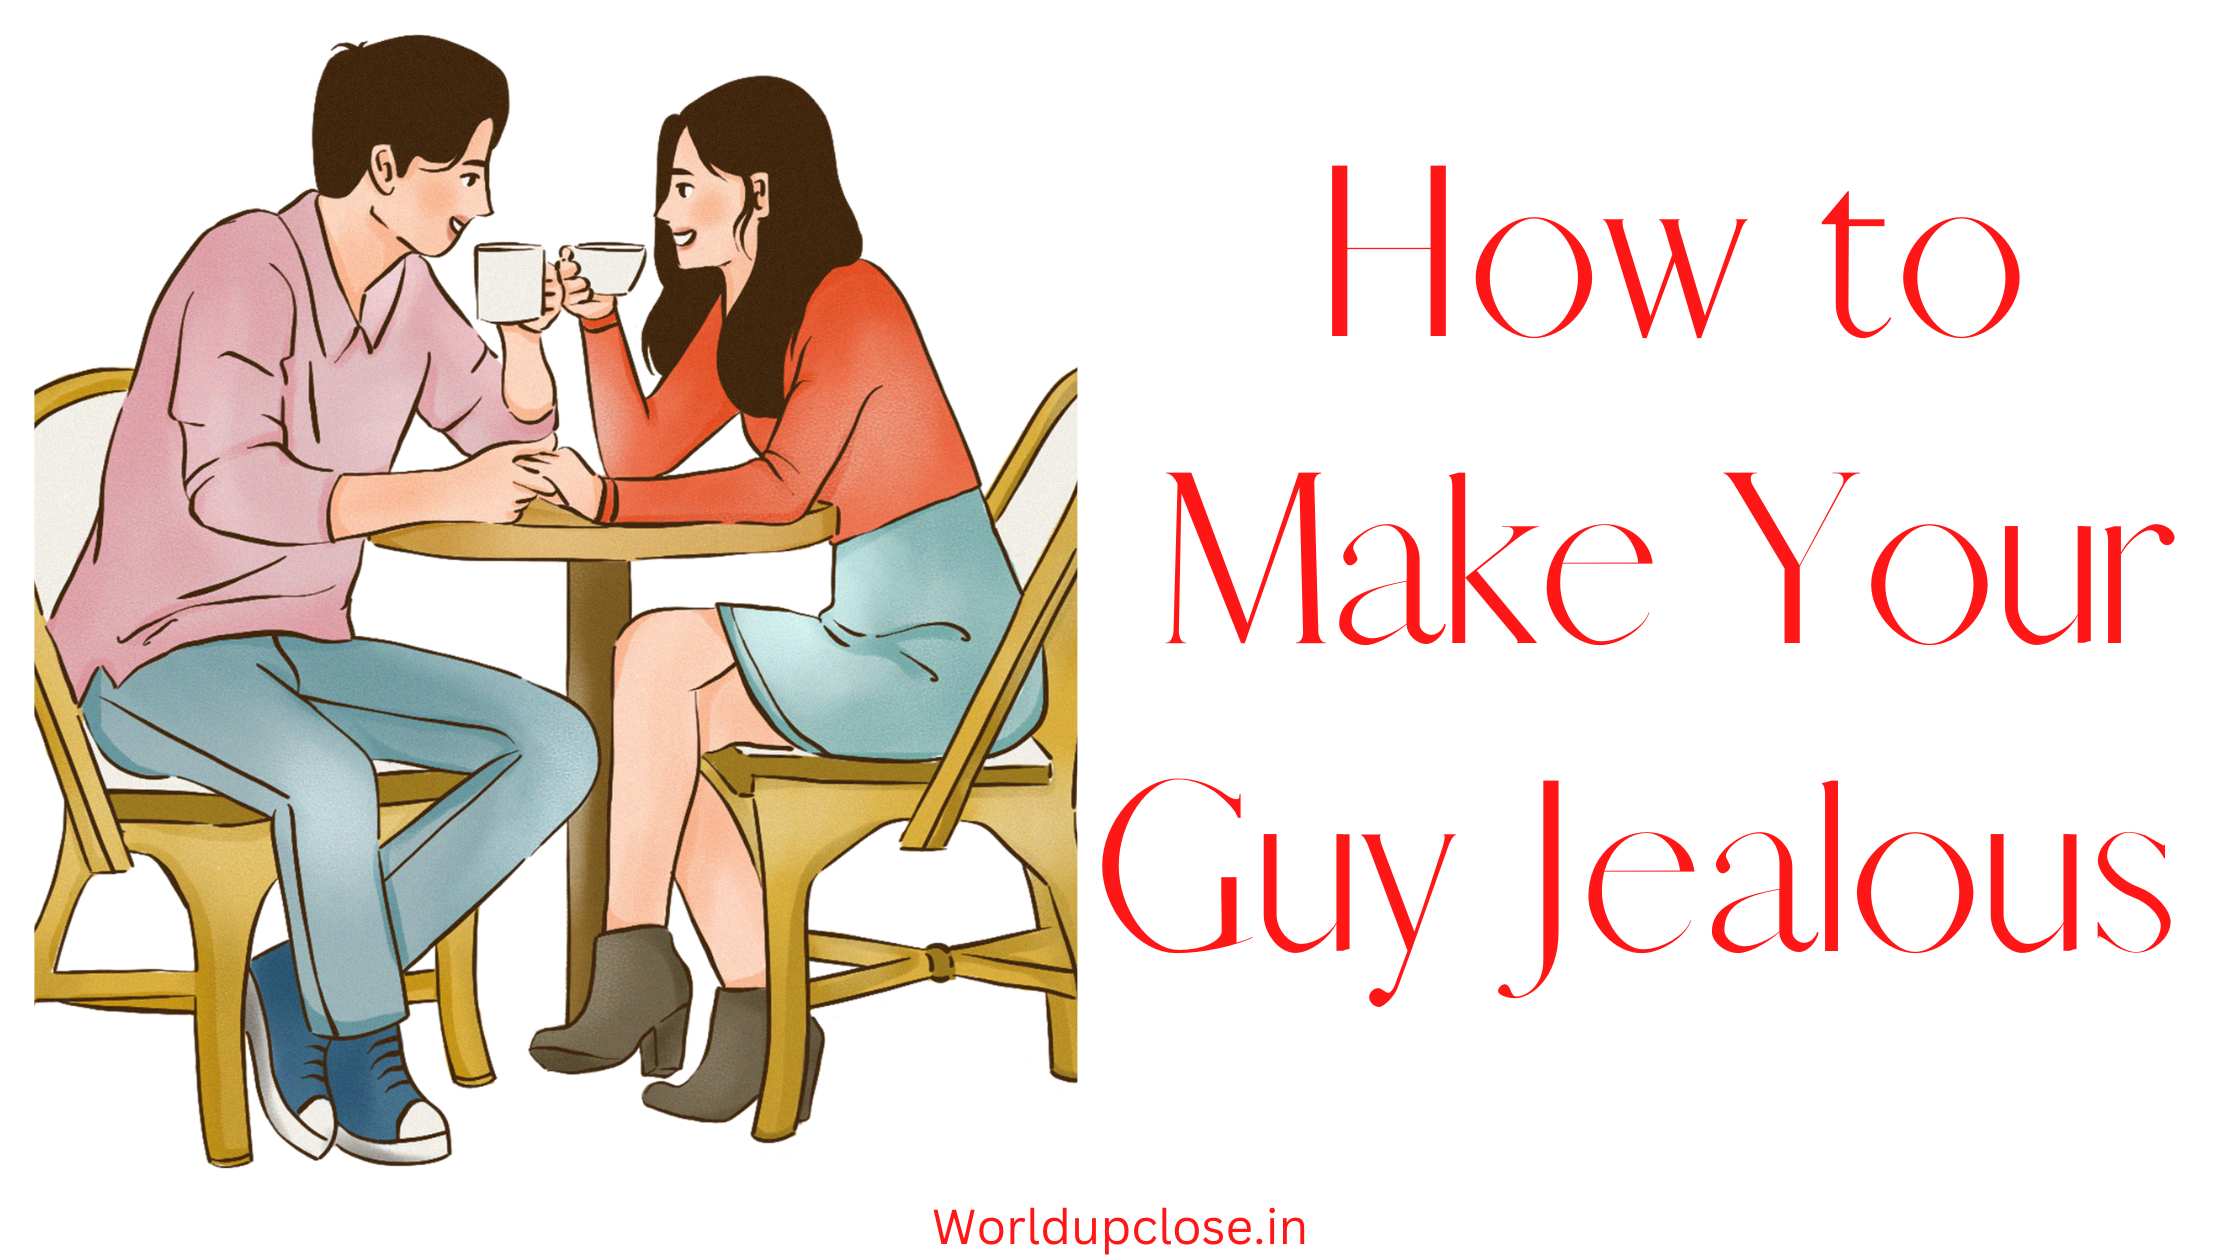  How to Make Your Guy Jealous 1